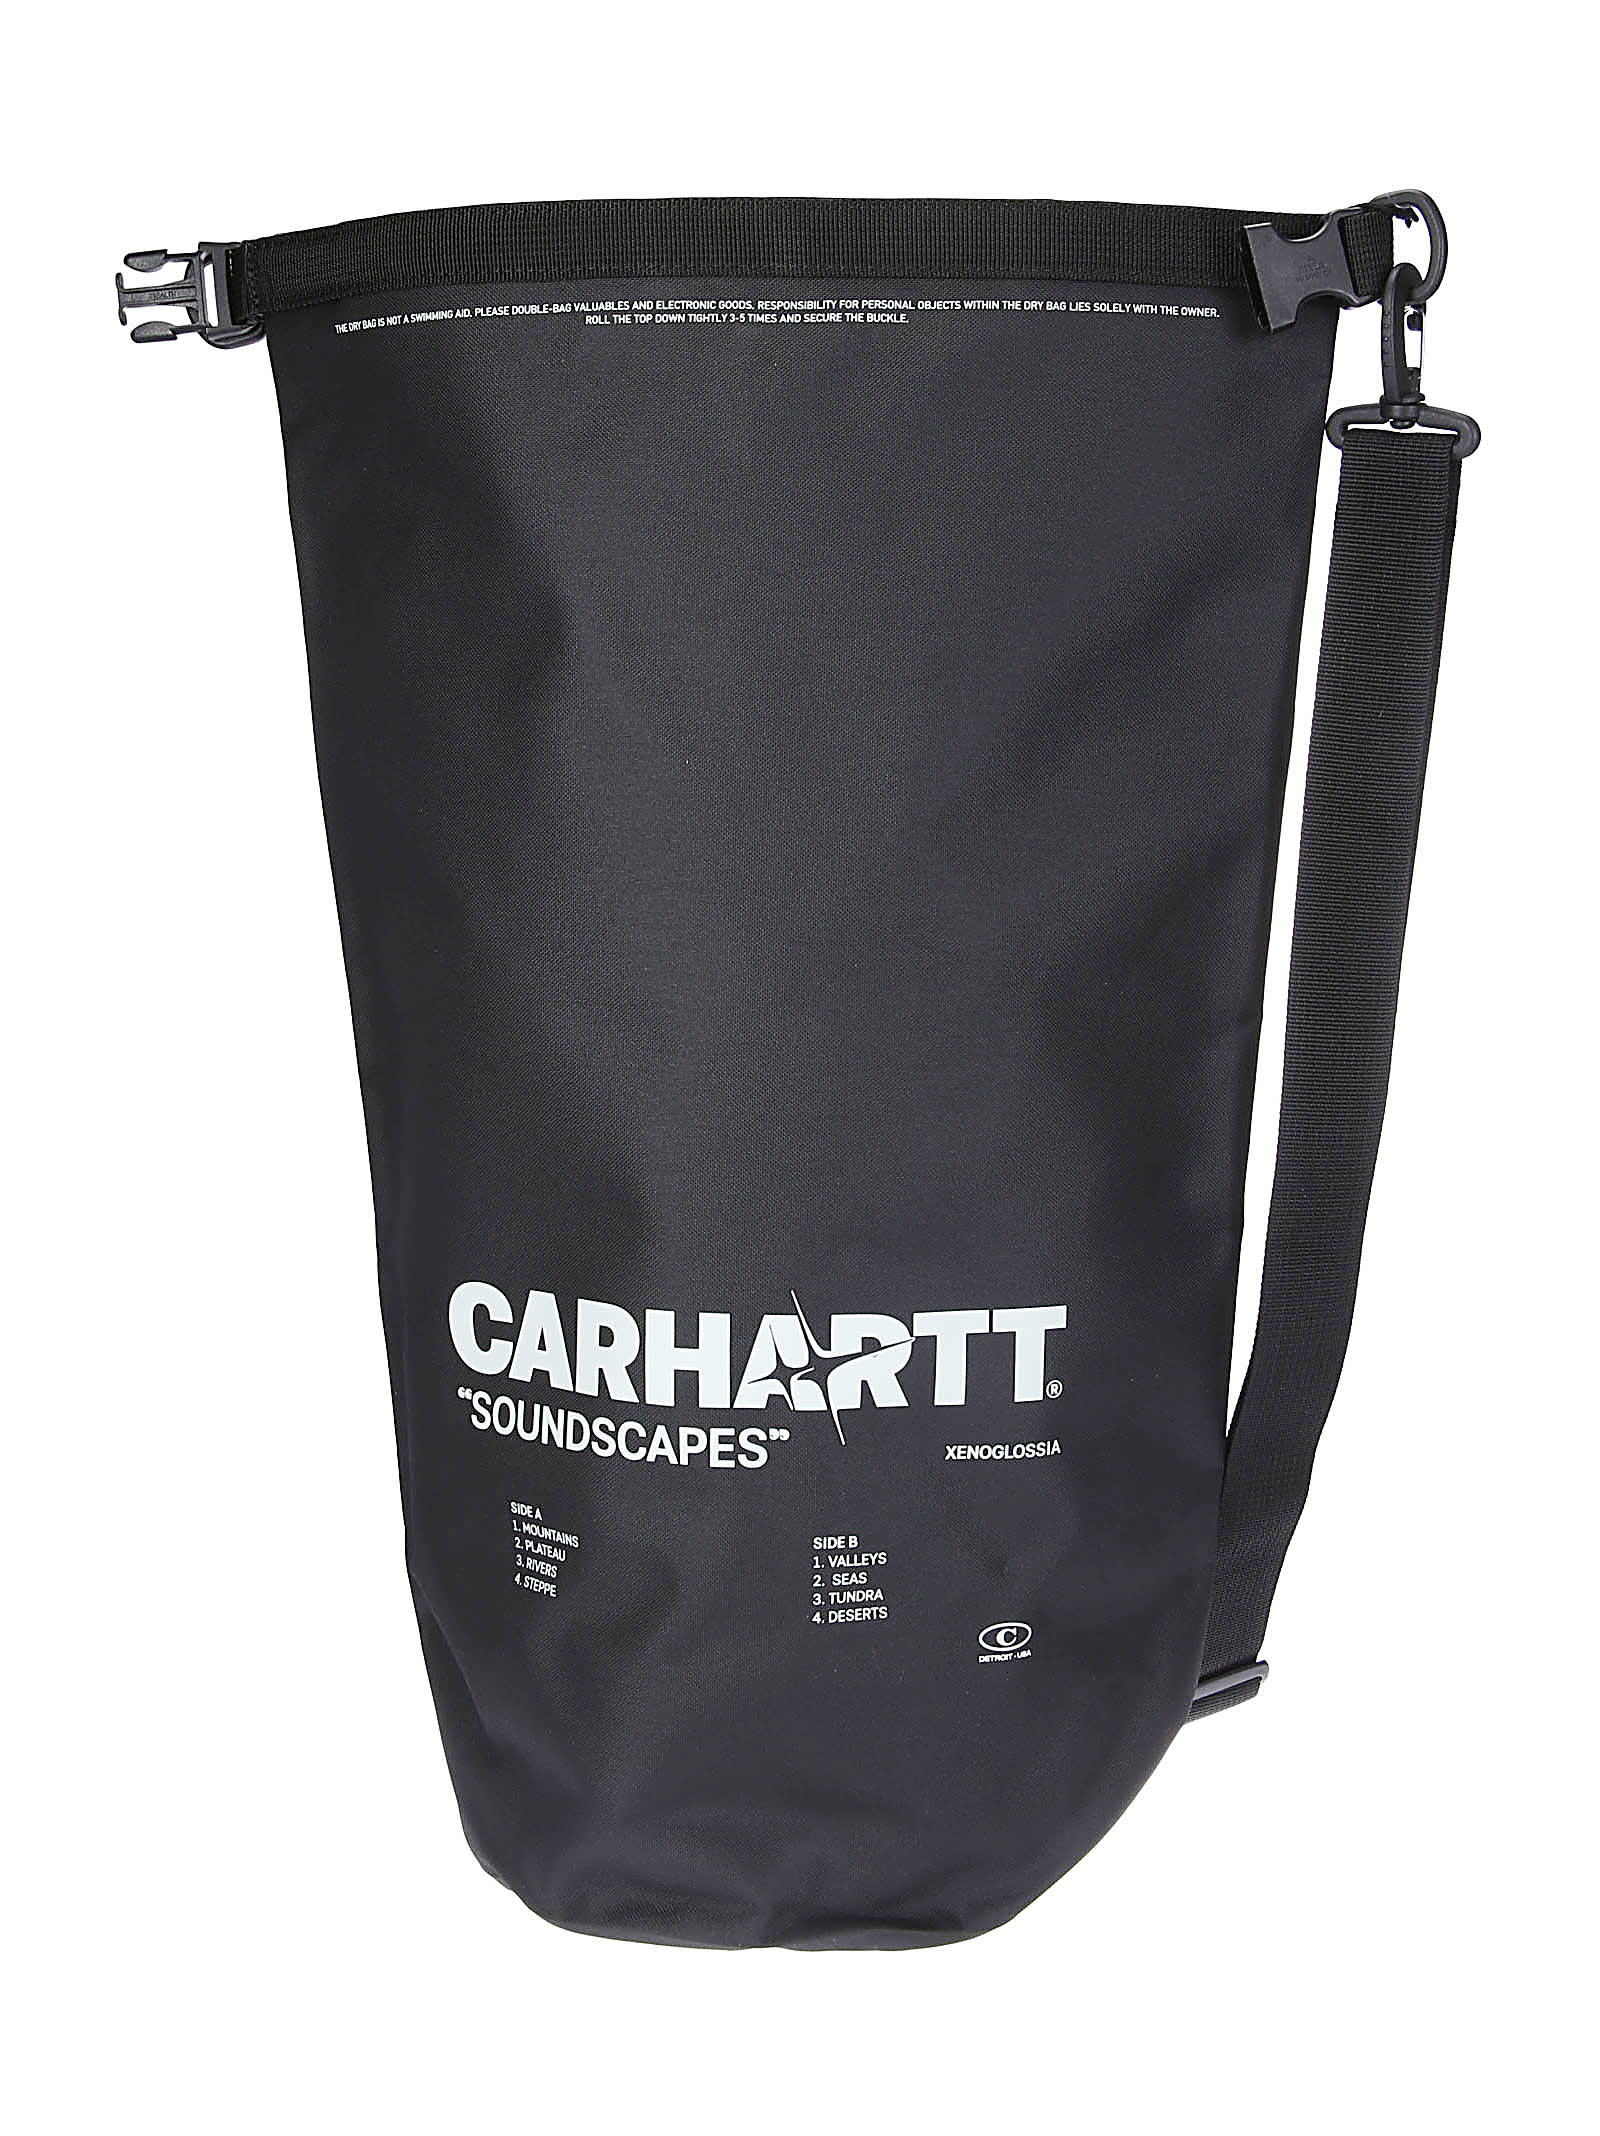 Carhartt #n#soundscapes Dry Bag In 1lpxx